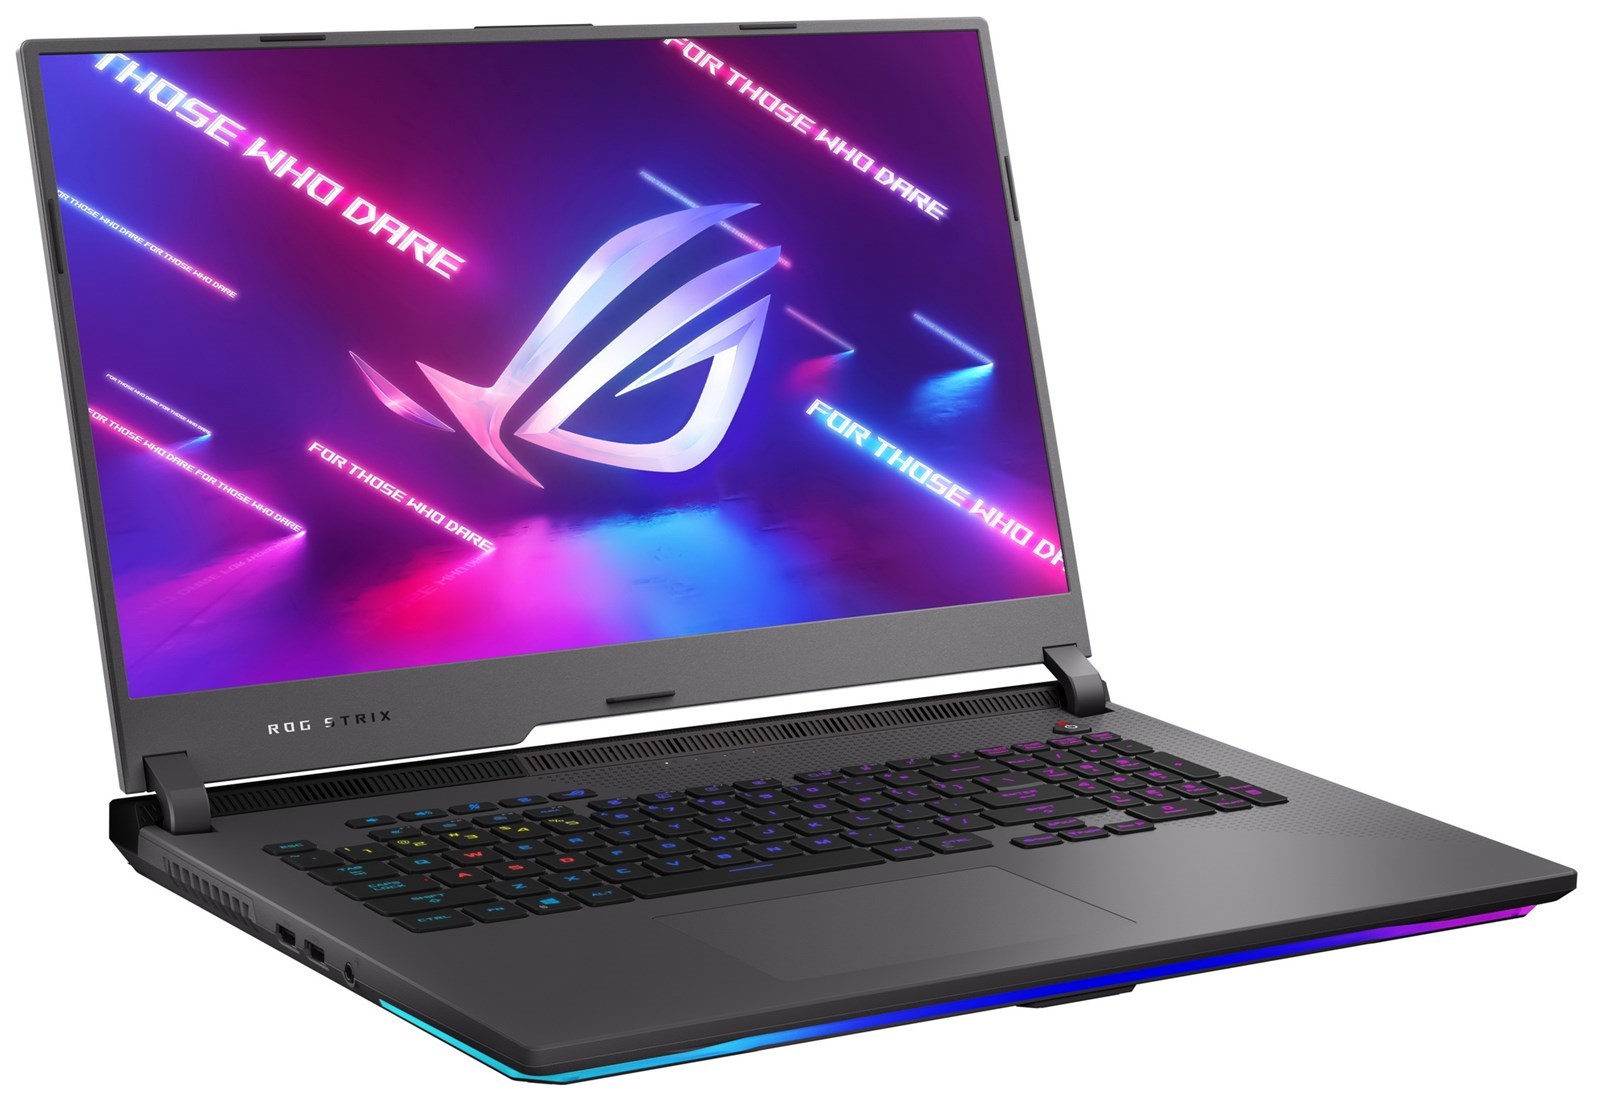 Pre-orders for Asus ROG Strix G17 with GeForce RTX 3060 and Ryzen 7 5800H, now live at $ 1499 USD